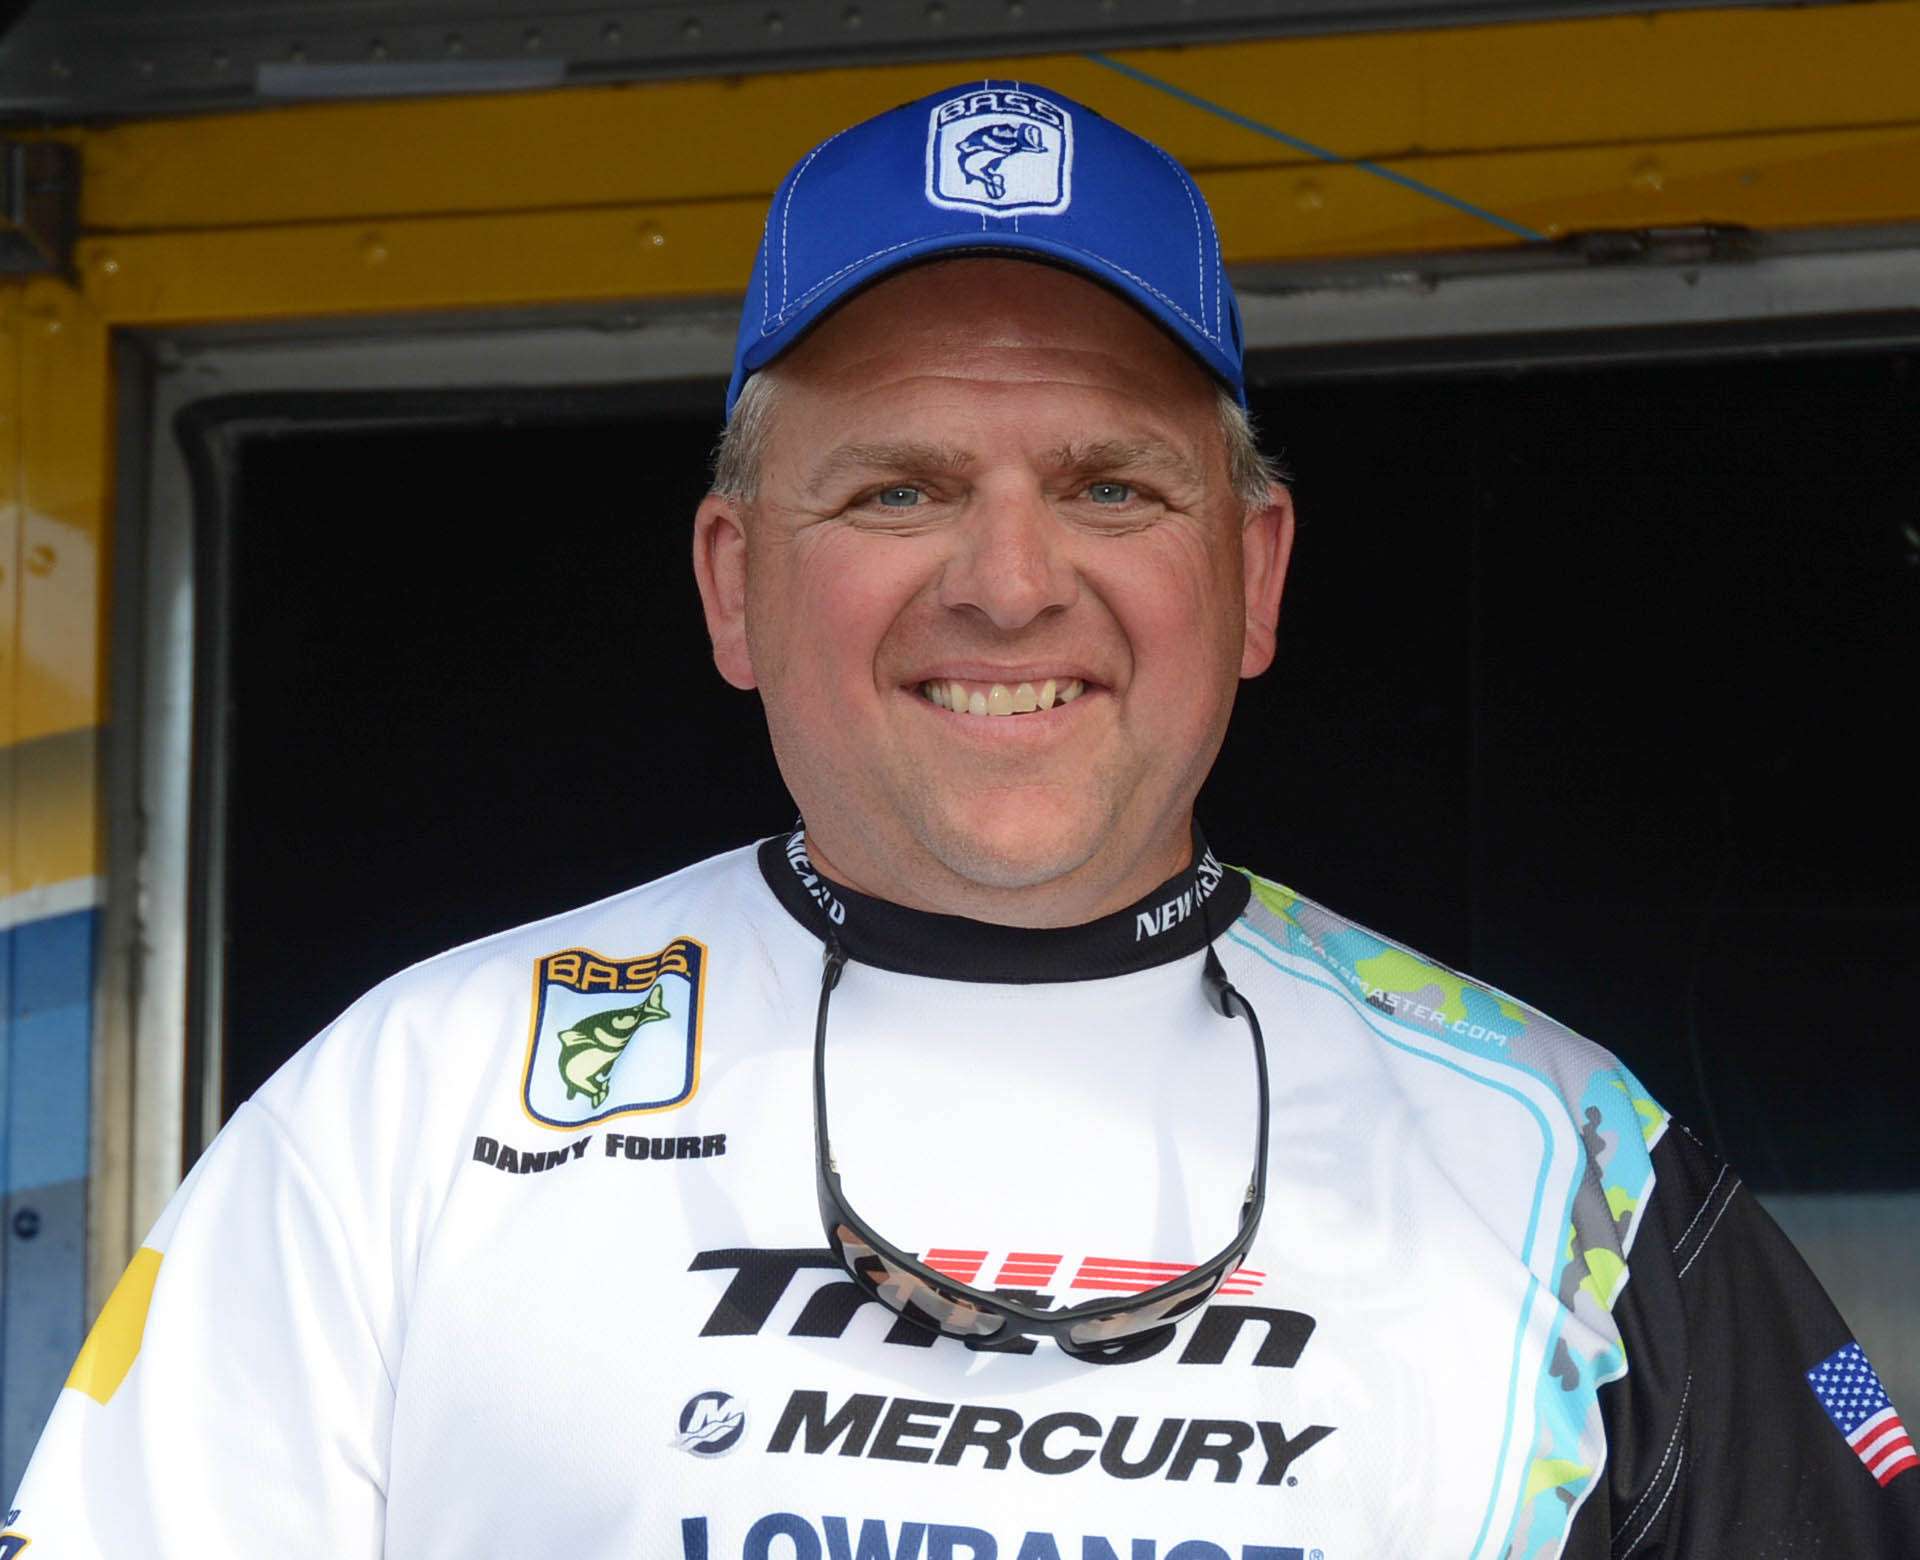 Danny Fourr <br>
New Mexico Nonboater <br>
Danny Fourr is a manufacturers rep. Heâs a member of the Four Corners Bassmasters, and he loves camping and hanging out with his family. This will be Fourrâs first championship. He is sponsored by Clow Valve Co. and Denali Rods. 